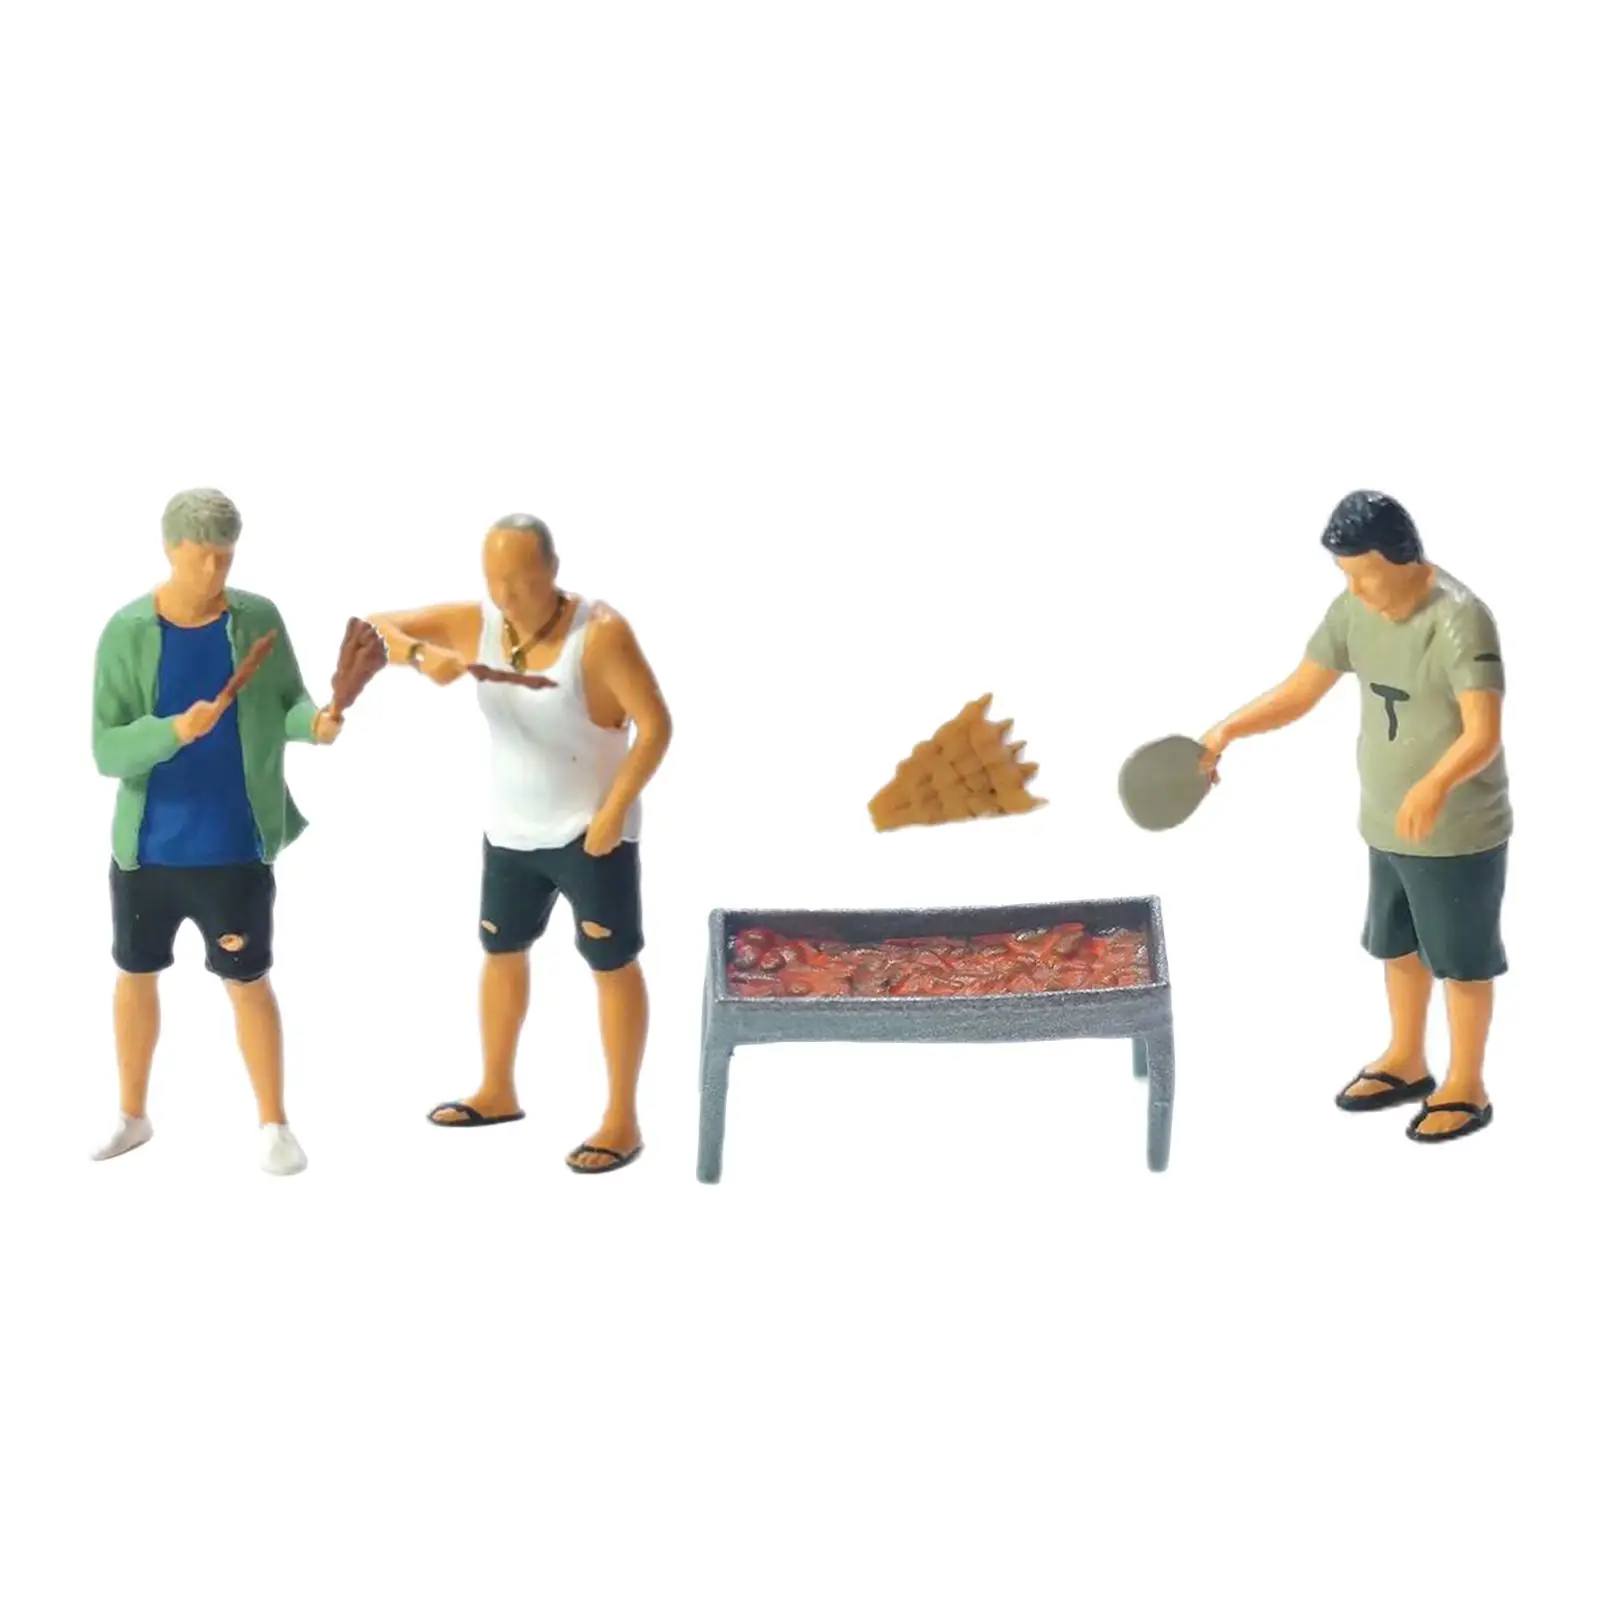 5x 1/64 BBQ Figure Model Set Collections Movie Props Sand Table Layout Decoration S Scale Train Railway Dioramas Miniature Decor